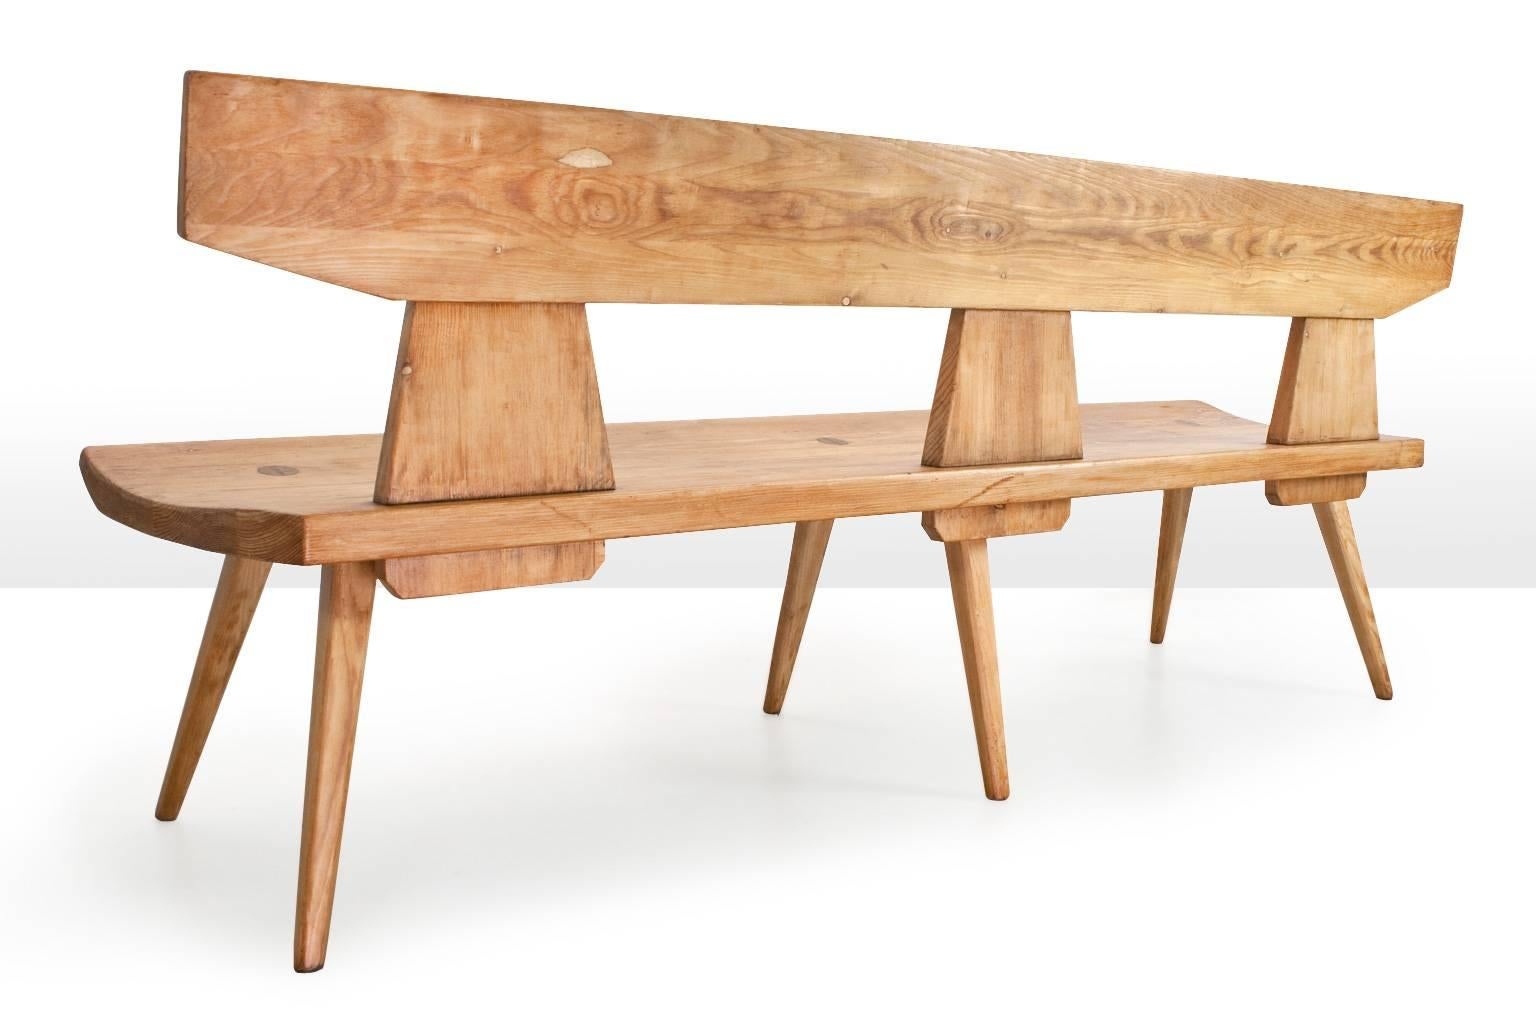 This Scandinavian modern 3 seater bench is definitely a text book example of the excellent Danish craftsmanship of the 1960s. This listed solid pine wooden bench was designed by the outstanding cabinetmaker Jacob Kielland Brandt in the 1960s for